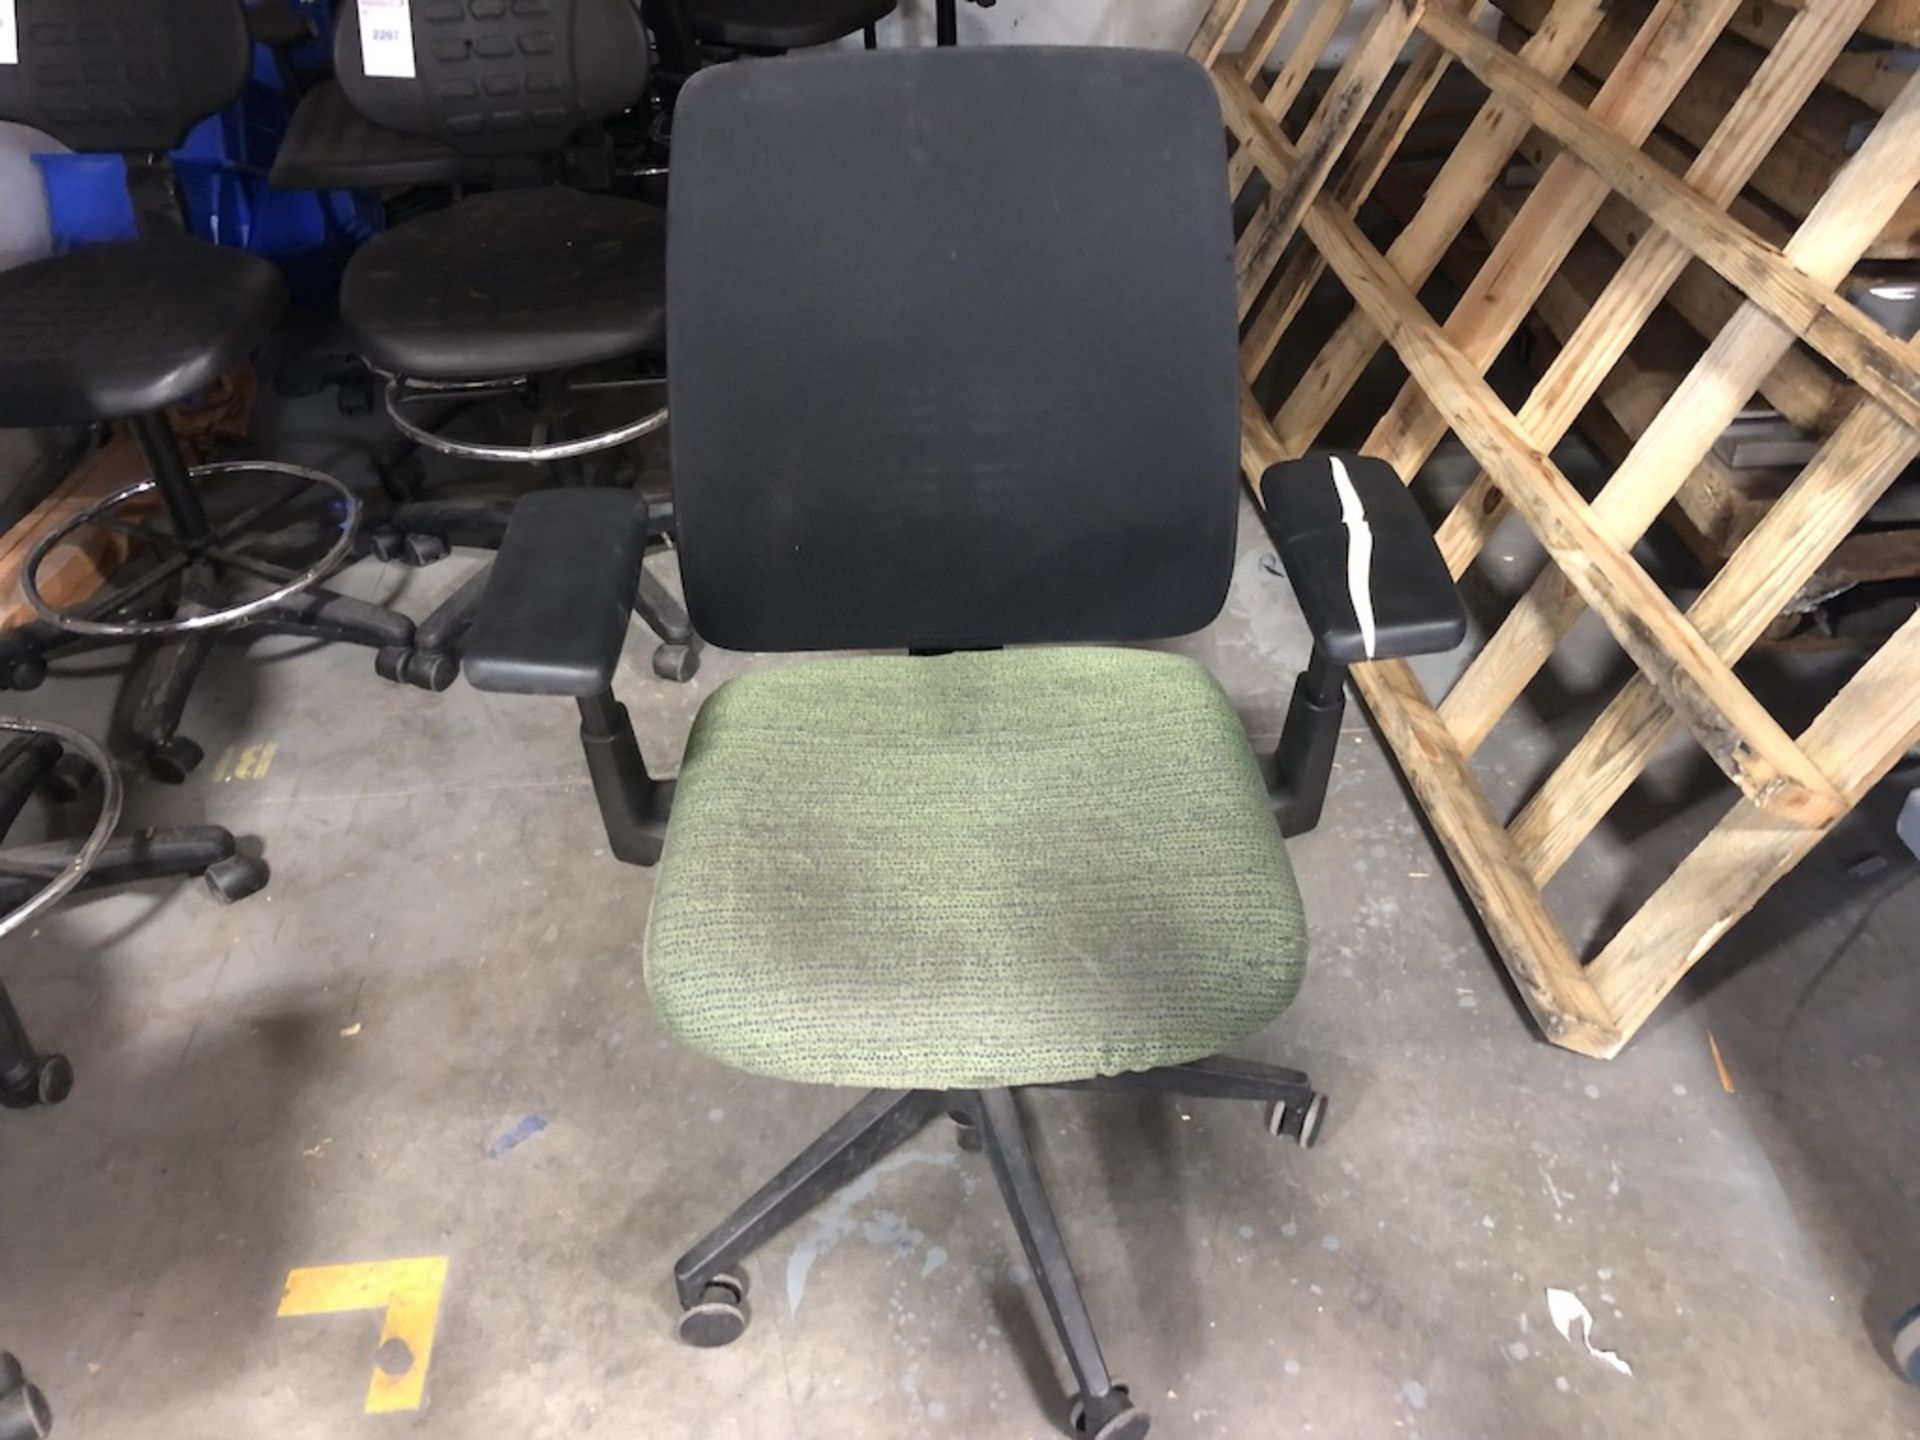 5 CASTER OFFICE CHAIR GREEN SEAT CUSHION, PADDED ARM REST ( SPLIT ), BLACK MESH BACK SUPPORT